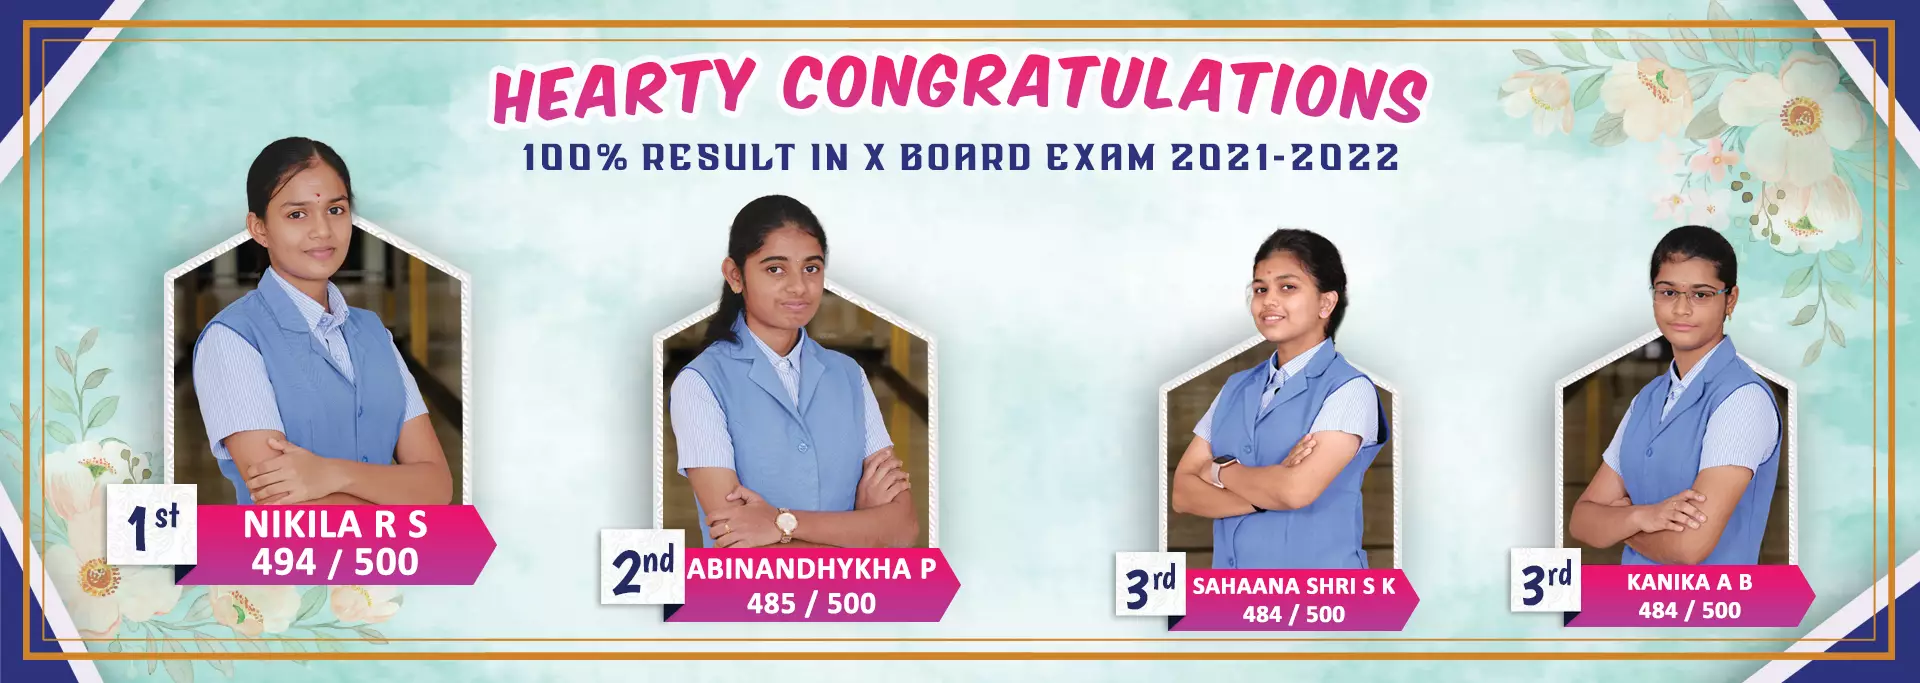 BAPS School XII Toppers 2021-2022